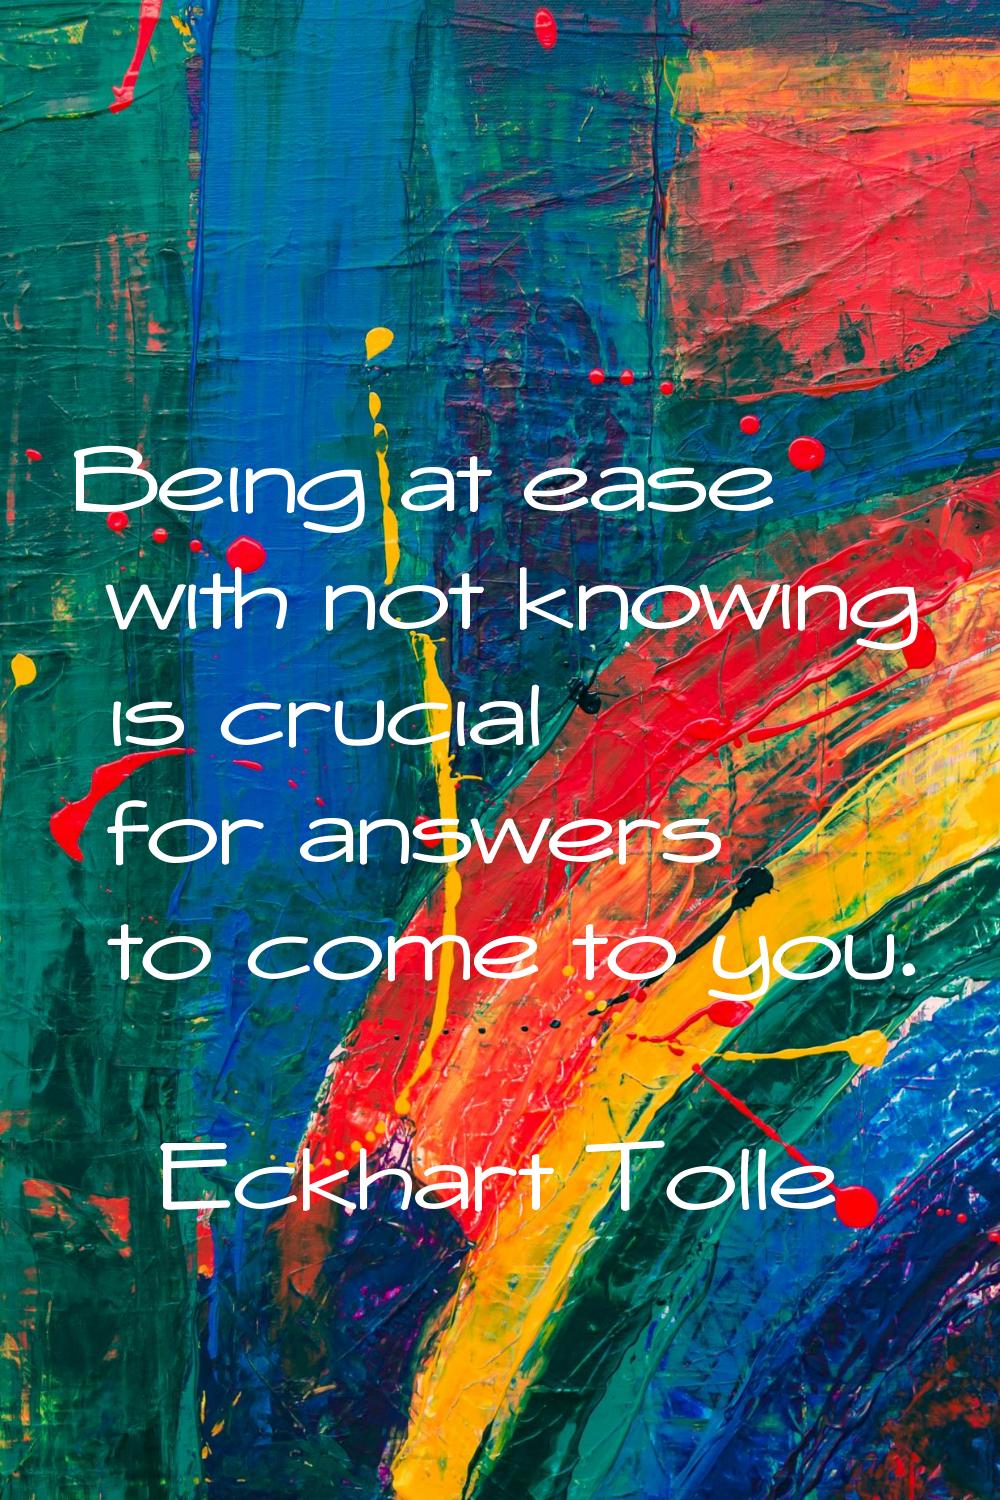 Being at ease with not knowing is crucial for answers to come to you.